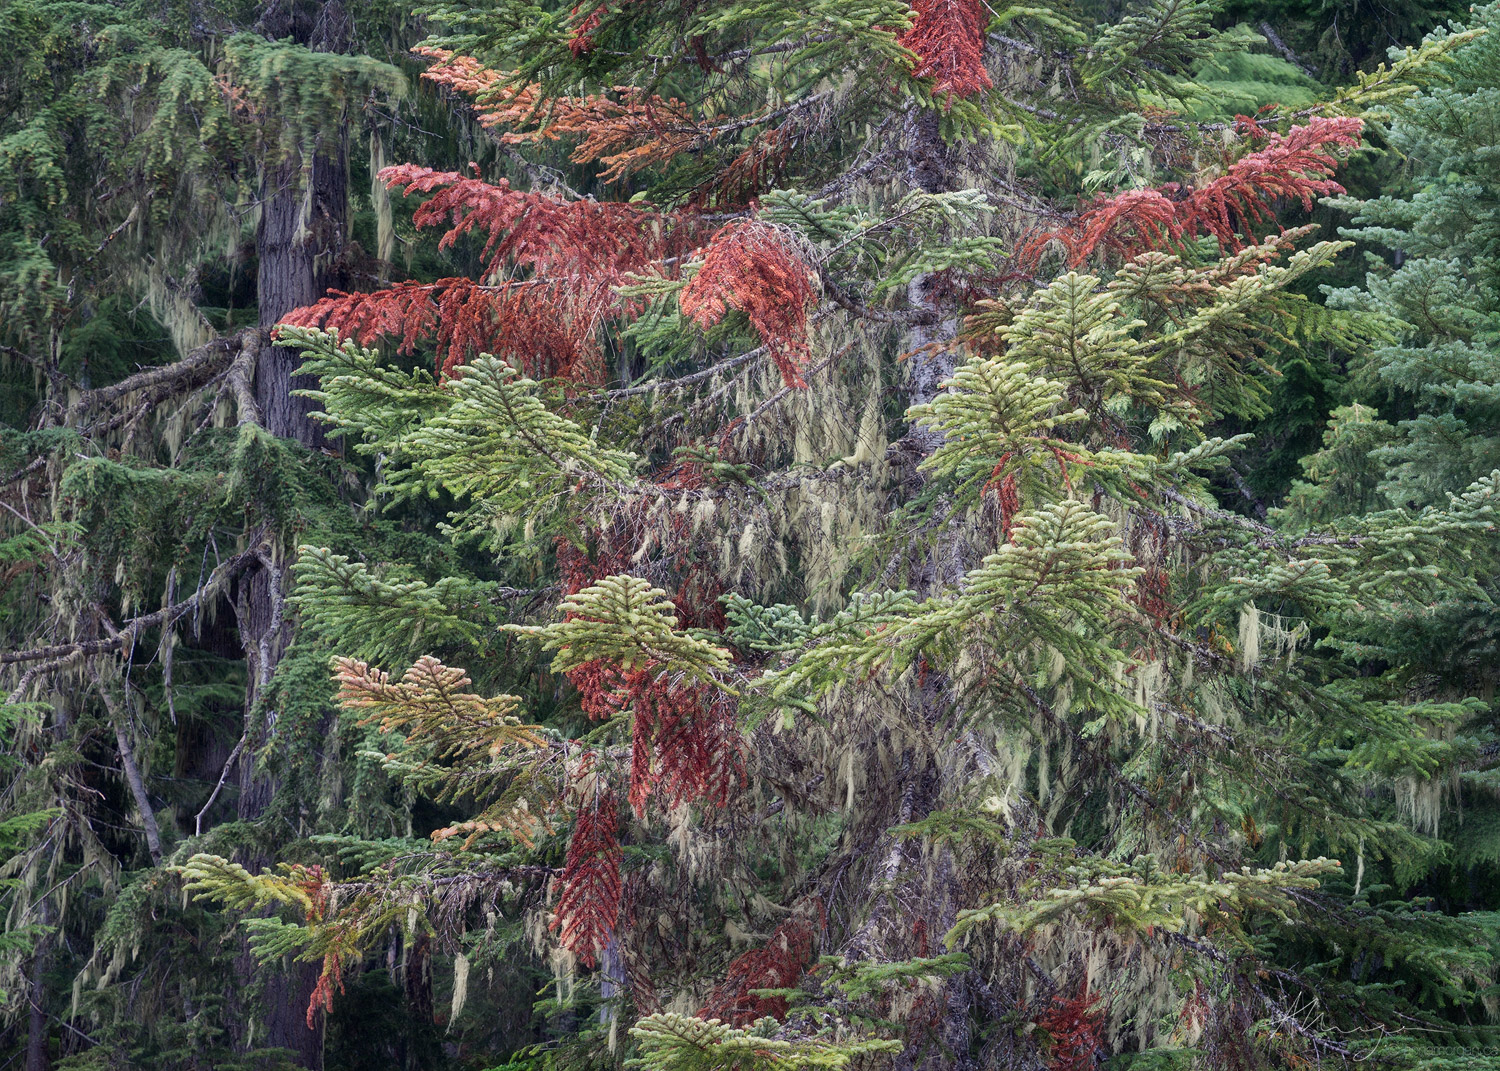 Lichens hang from old growth trees in temperate rainforest in Mount Rainier national park, Washington